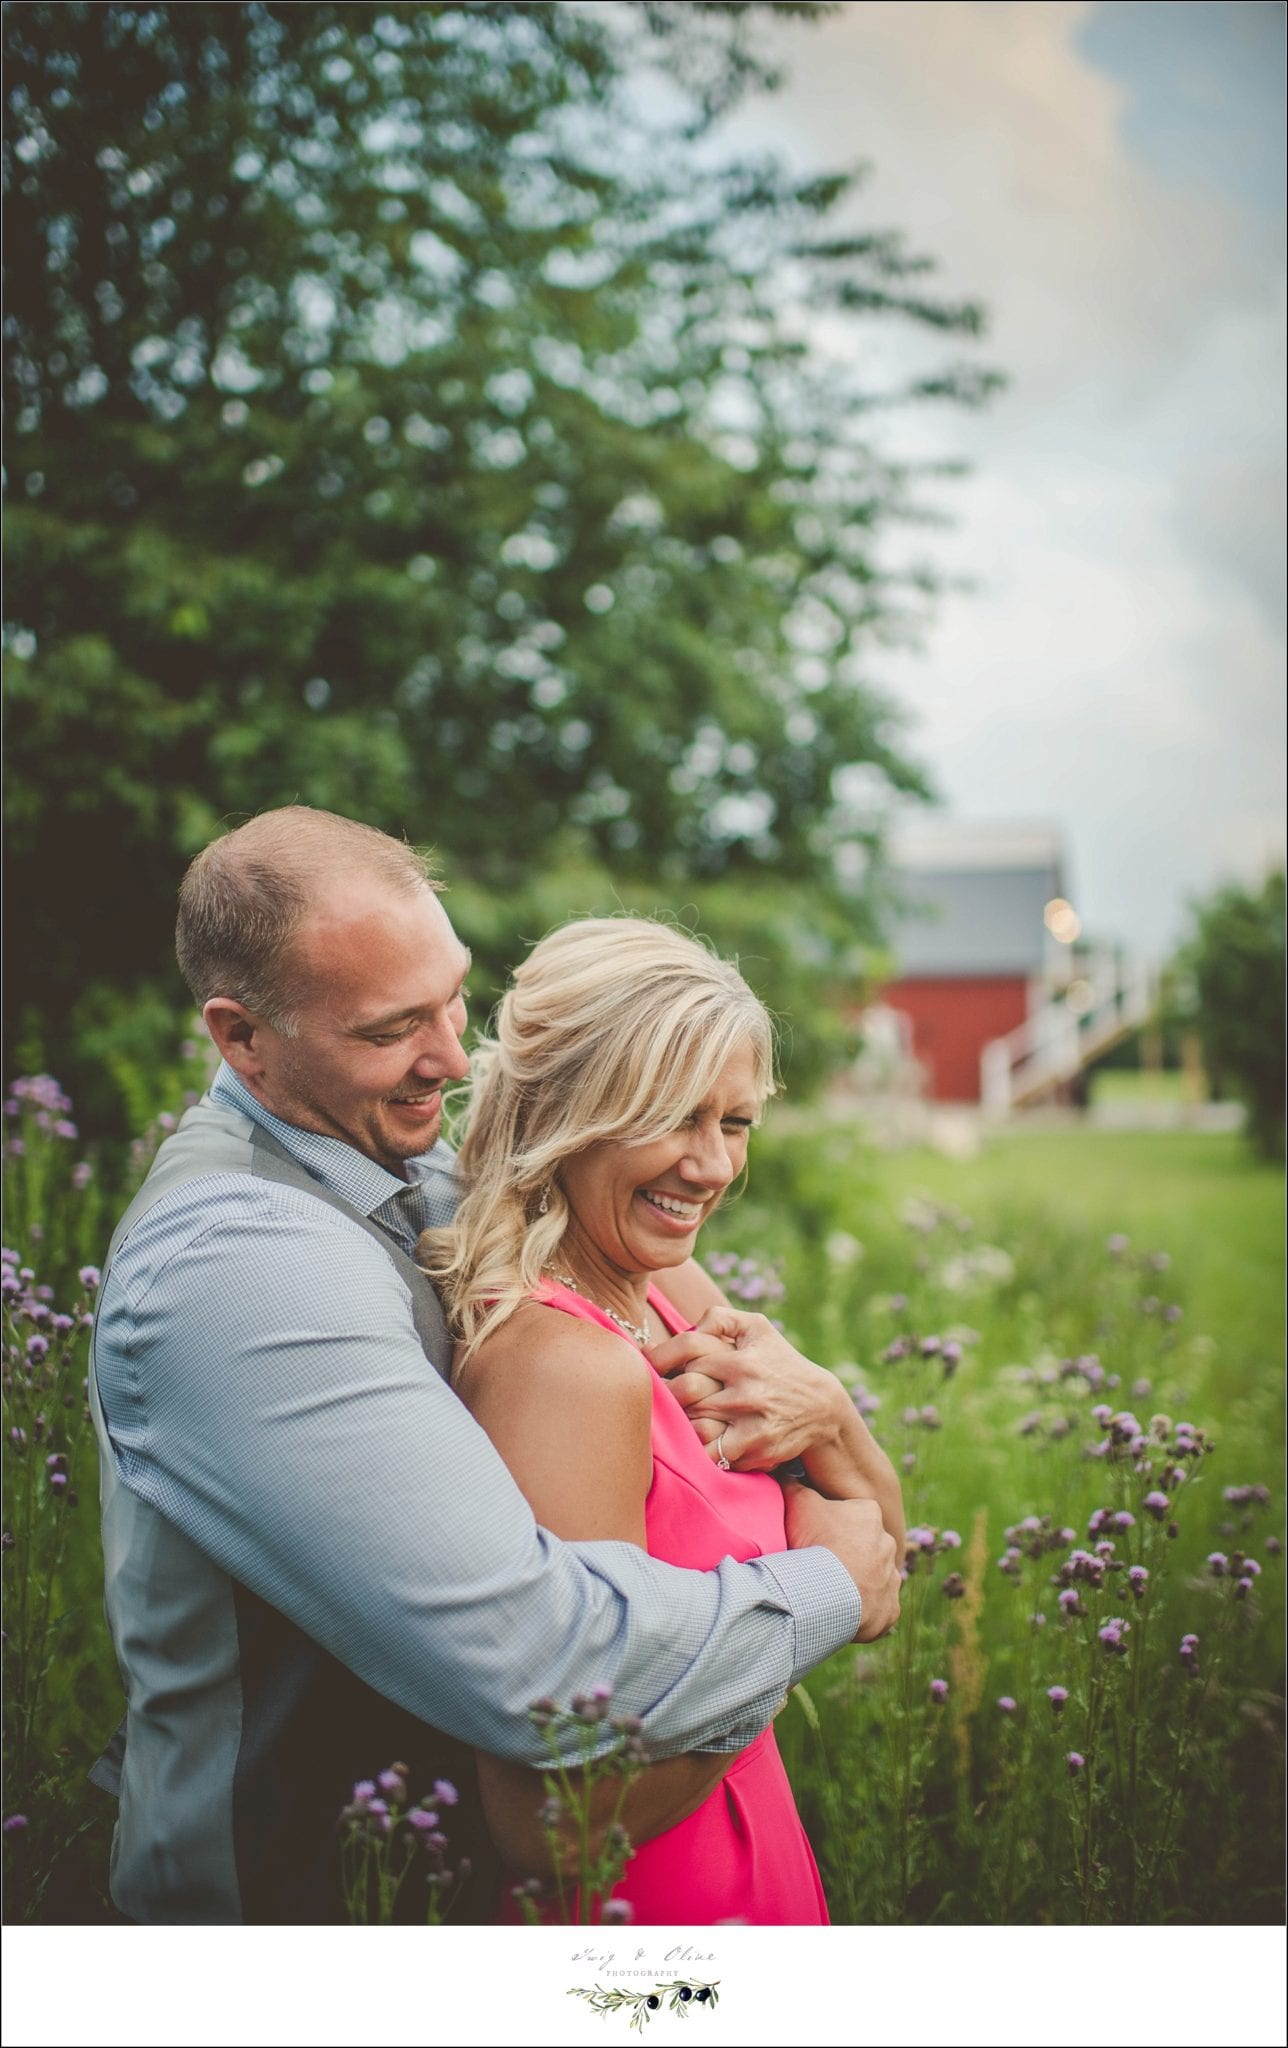 pink dress, blue shirt, sunset photograph, engagement sessions, Rustic Manor